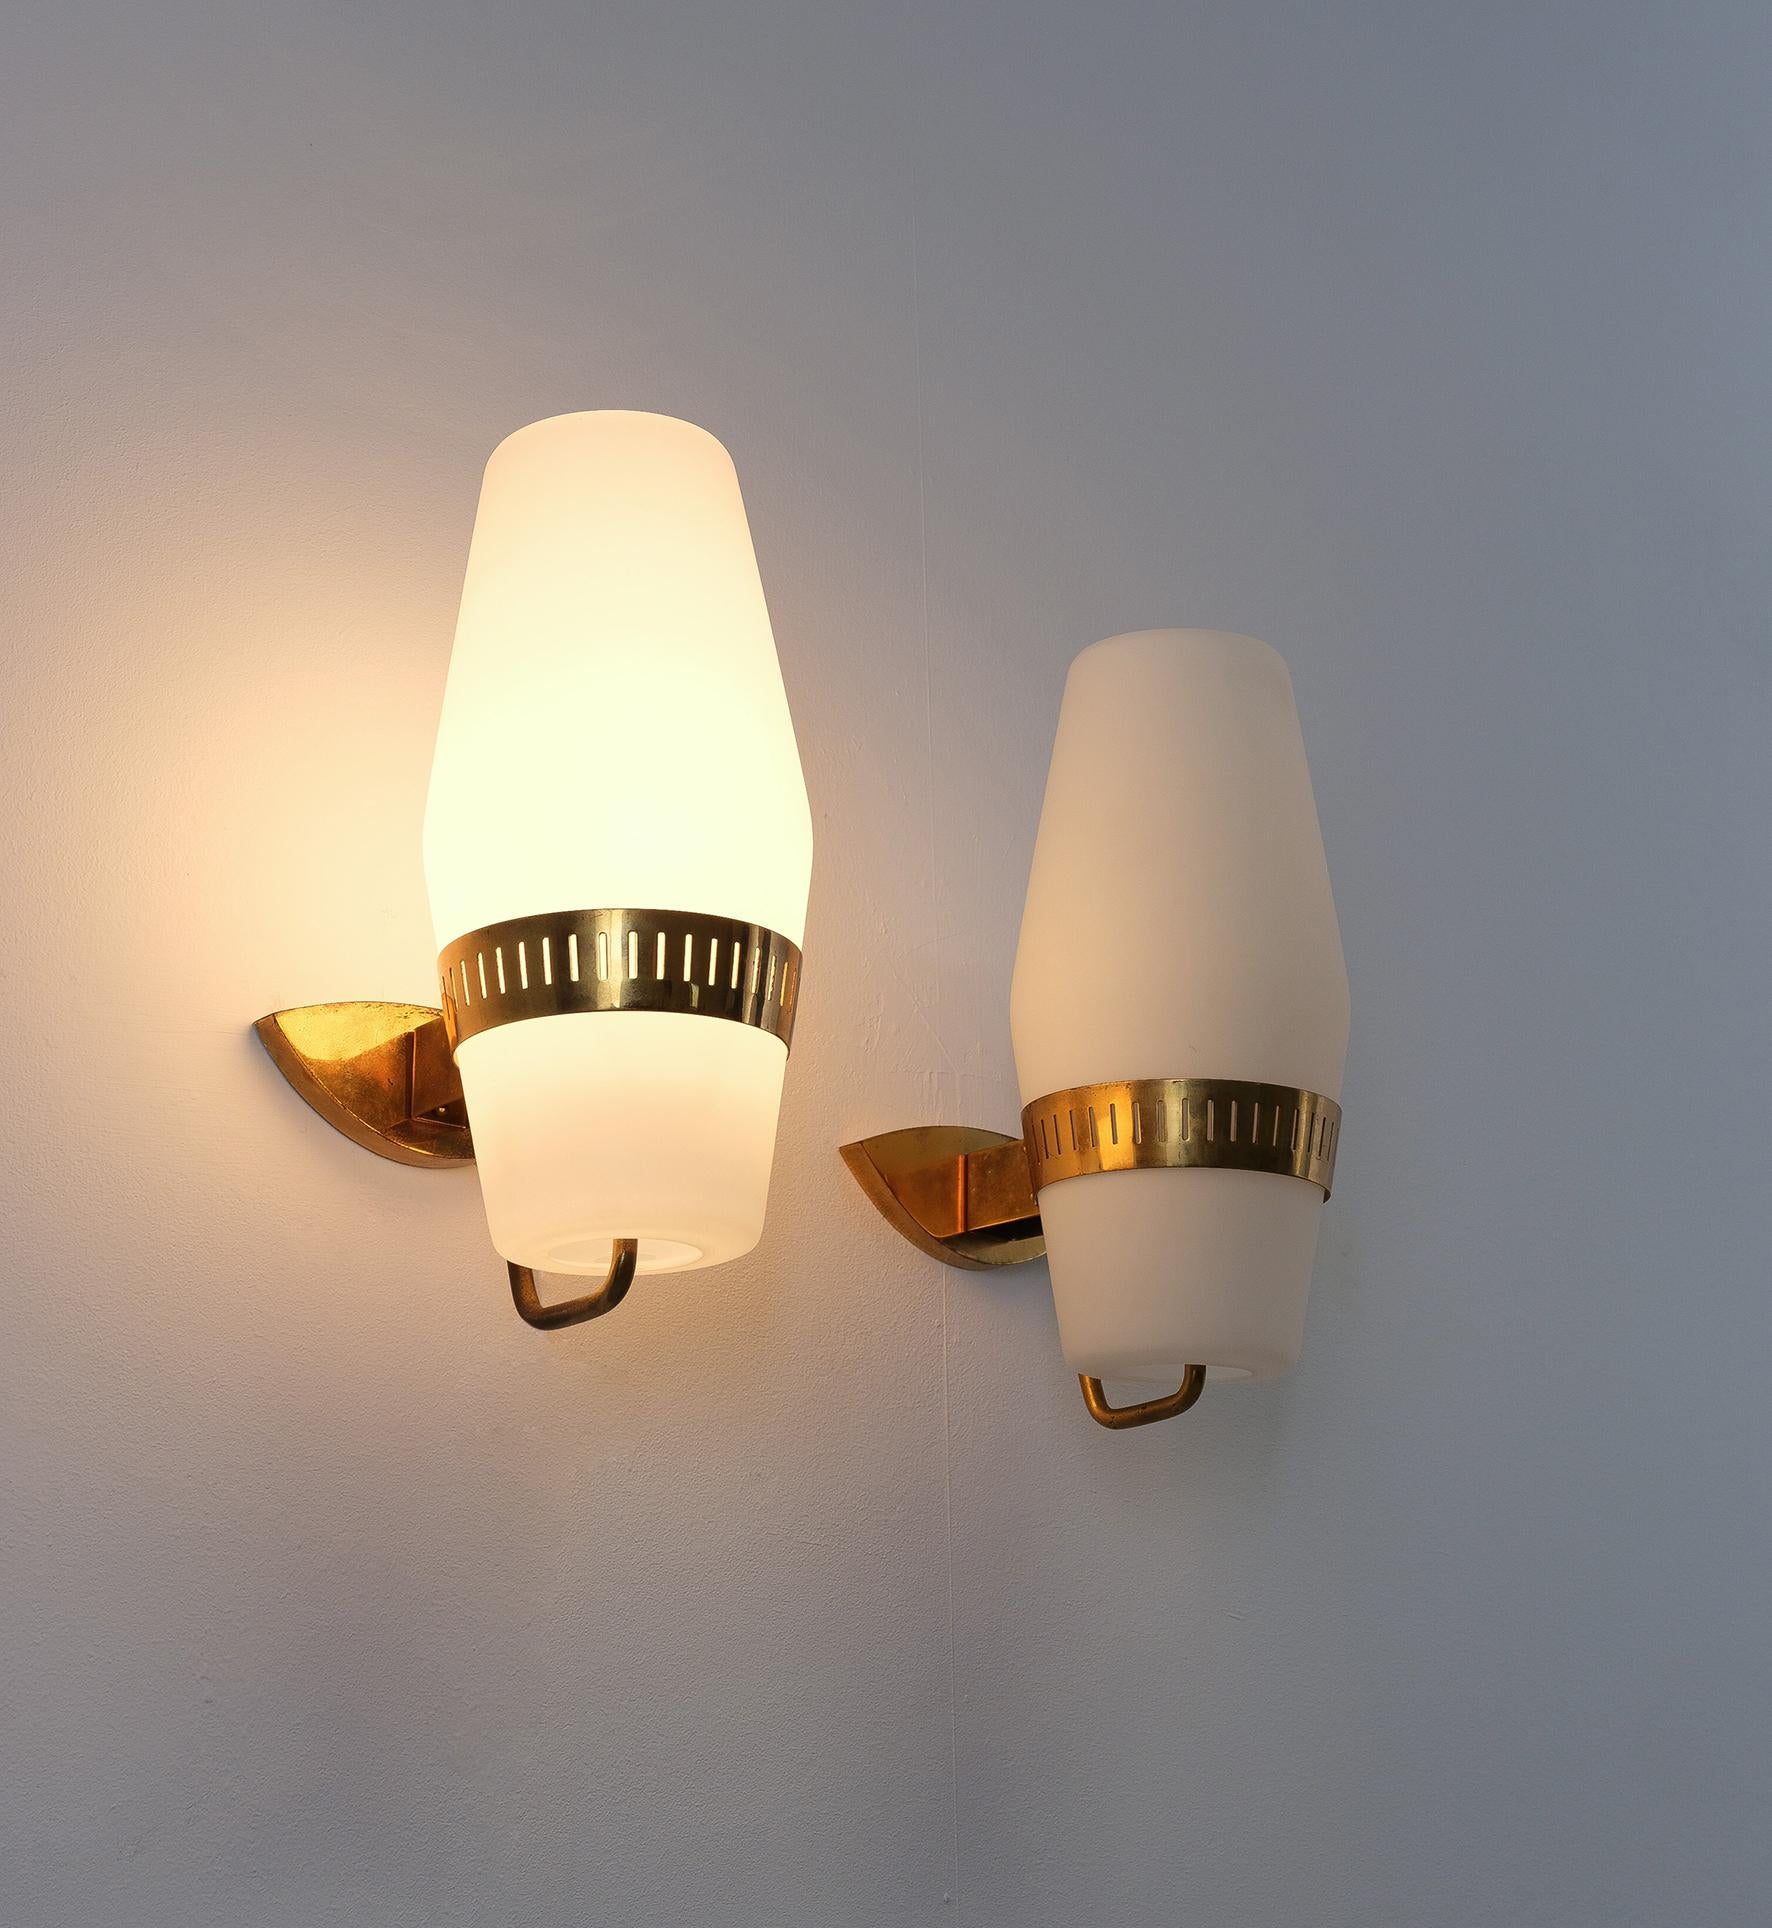 Stilnovo Bruno Gatta Mod. 2078 Glass Brass Wall Lights, Italy, 1959
We have 4 wall lights available, they are priced per pair (2)
Dimensions are 14.5“ x 8.66“ x 6.3“

Formidable set of four large wall lights with brass hardware and opal glass